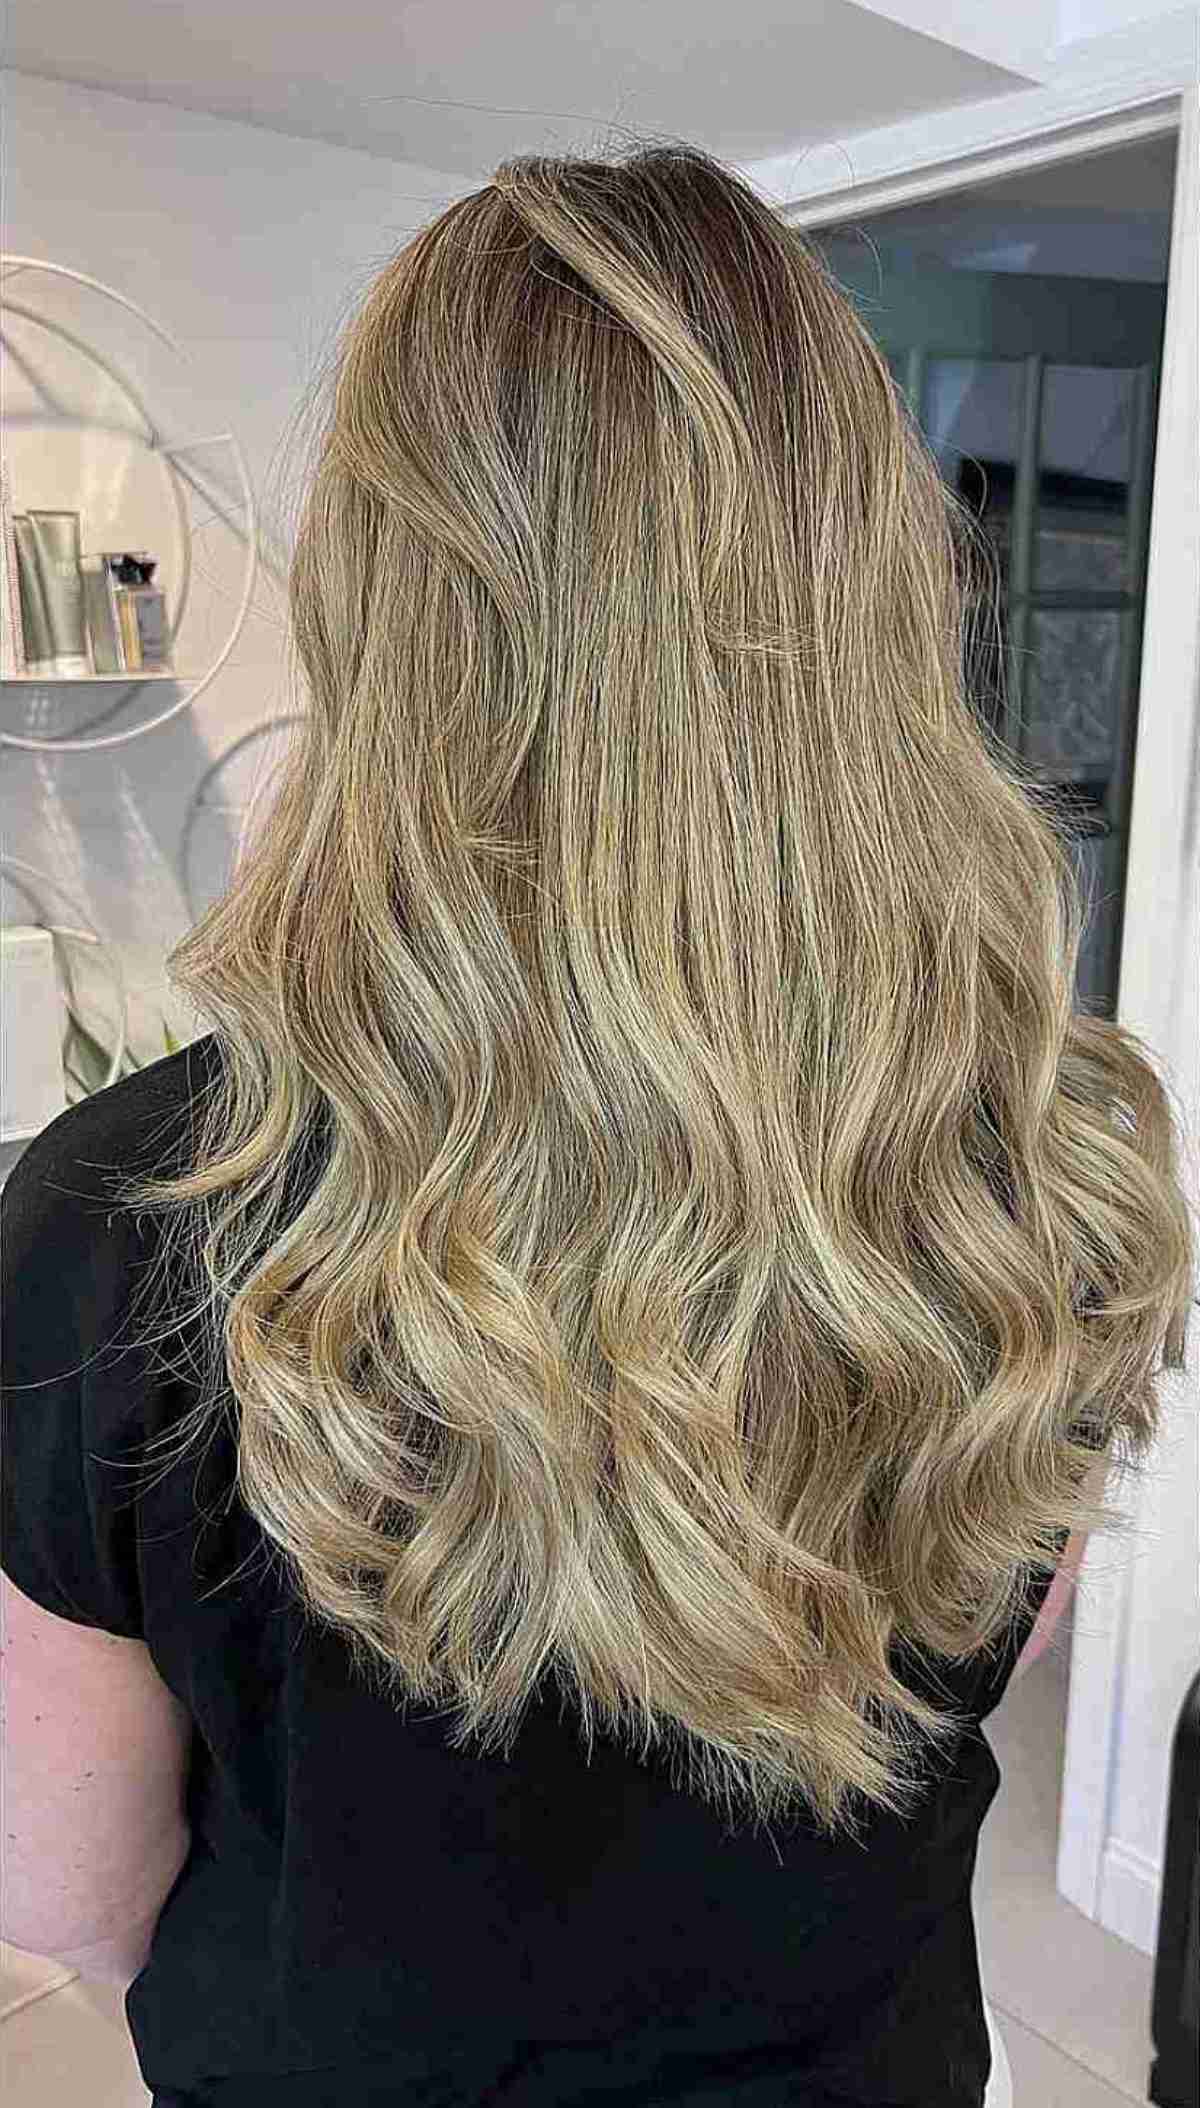 Wide V Cut on long and wavy hair